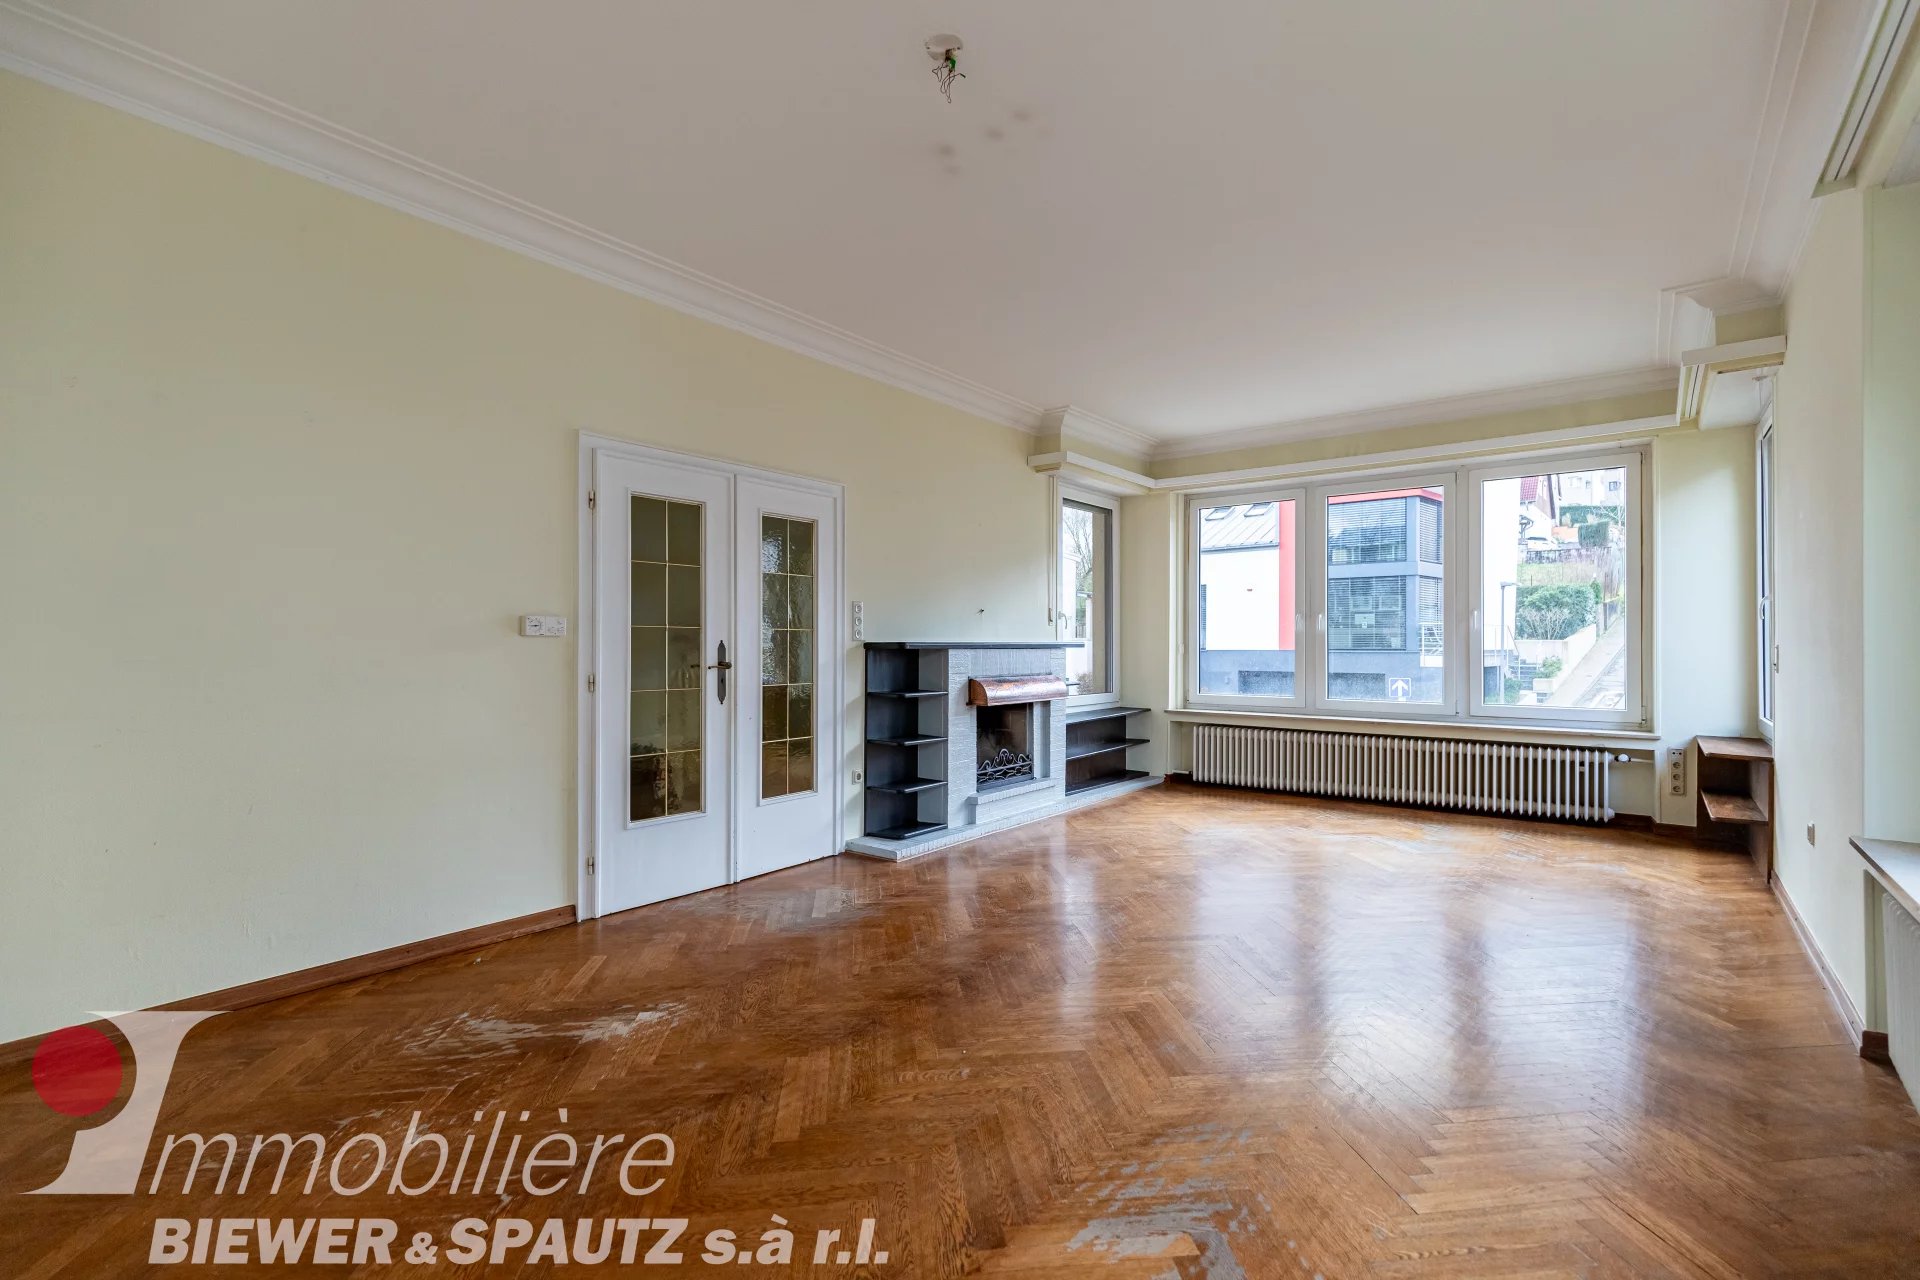 UNDER SALES AGREEMENT - House with 6 bedrooms in Grevenmacher